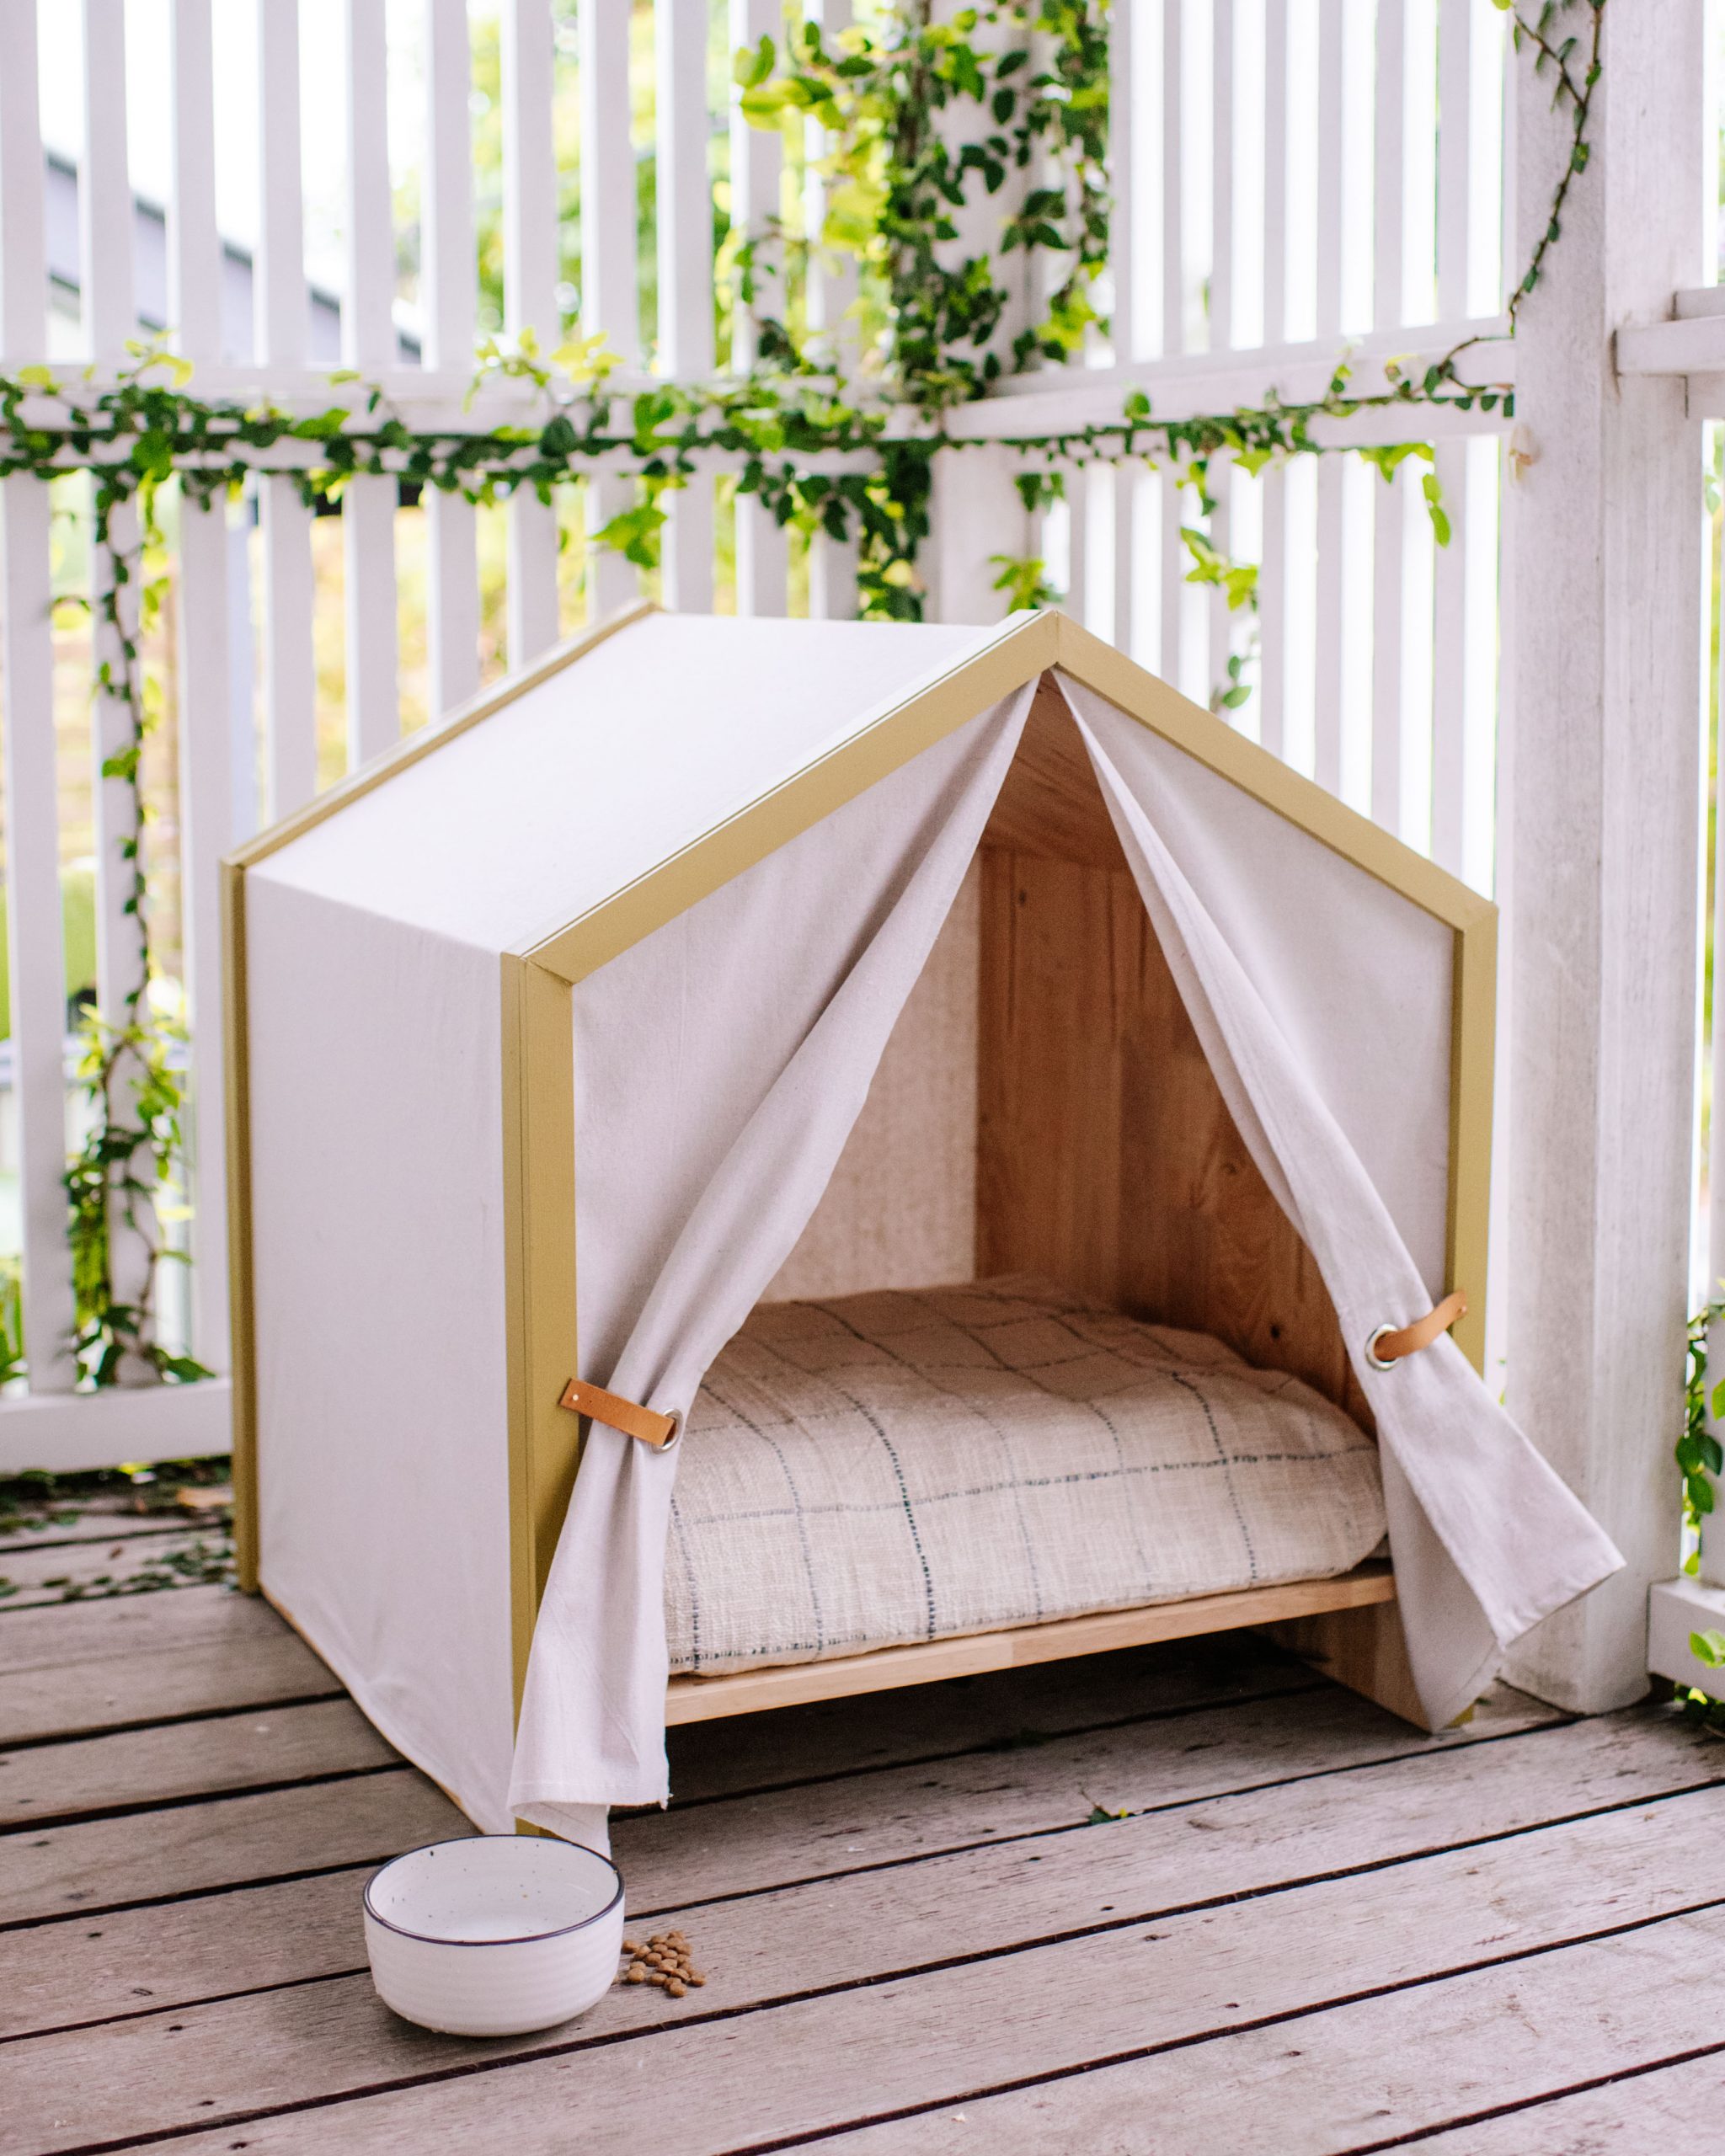 https://collectivegen.com/wp-content/uploads/2022/10/Camping-Inspired-Doghouse-3-scaled.jpg